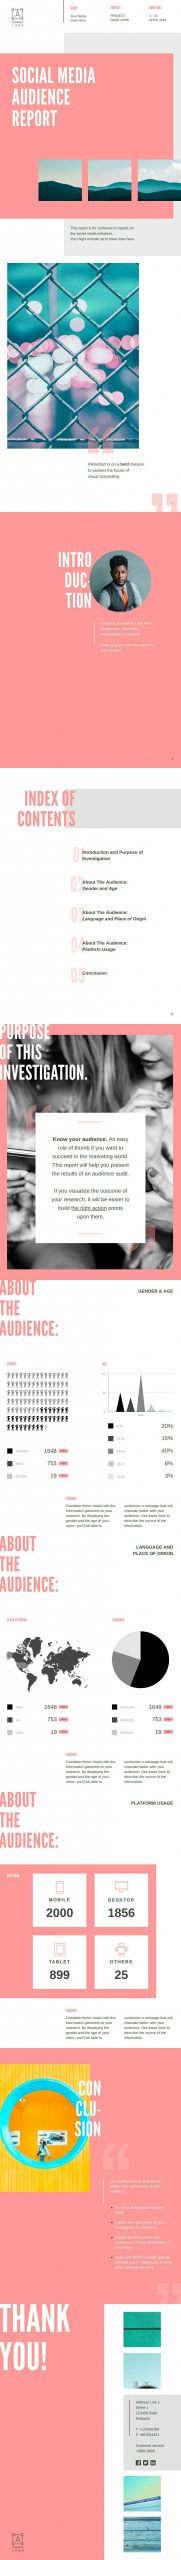 Audience Report Template